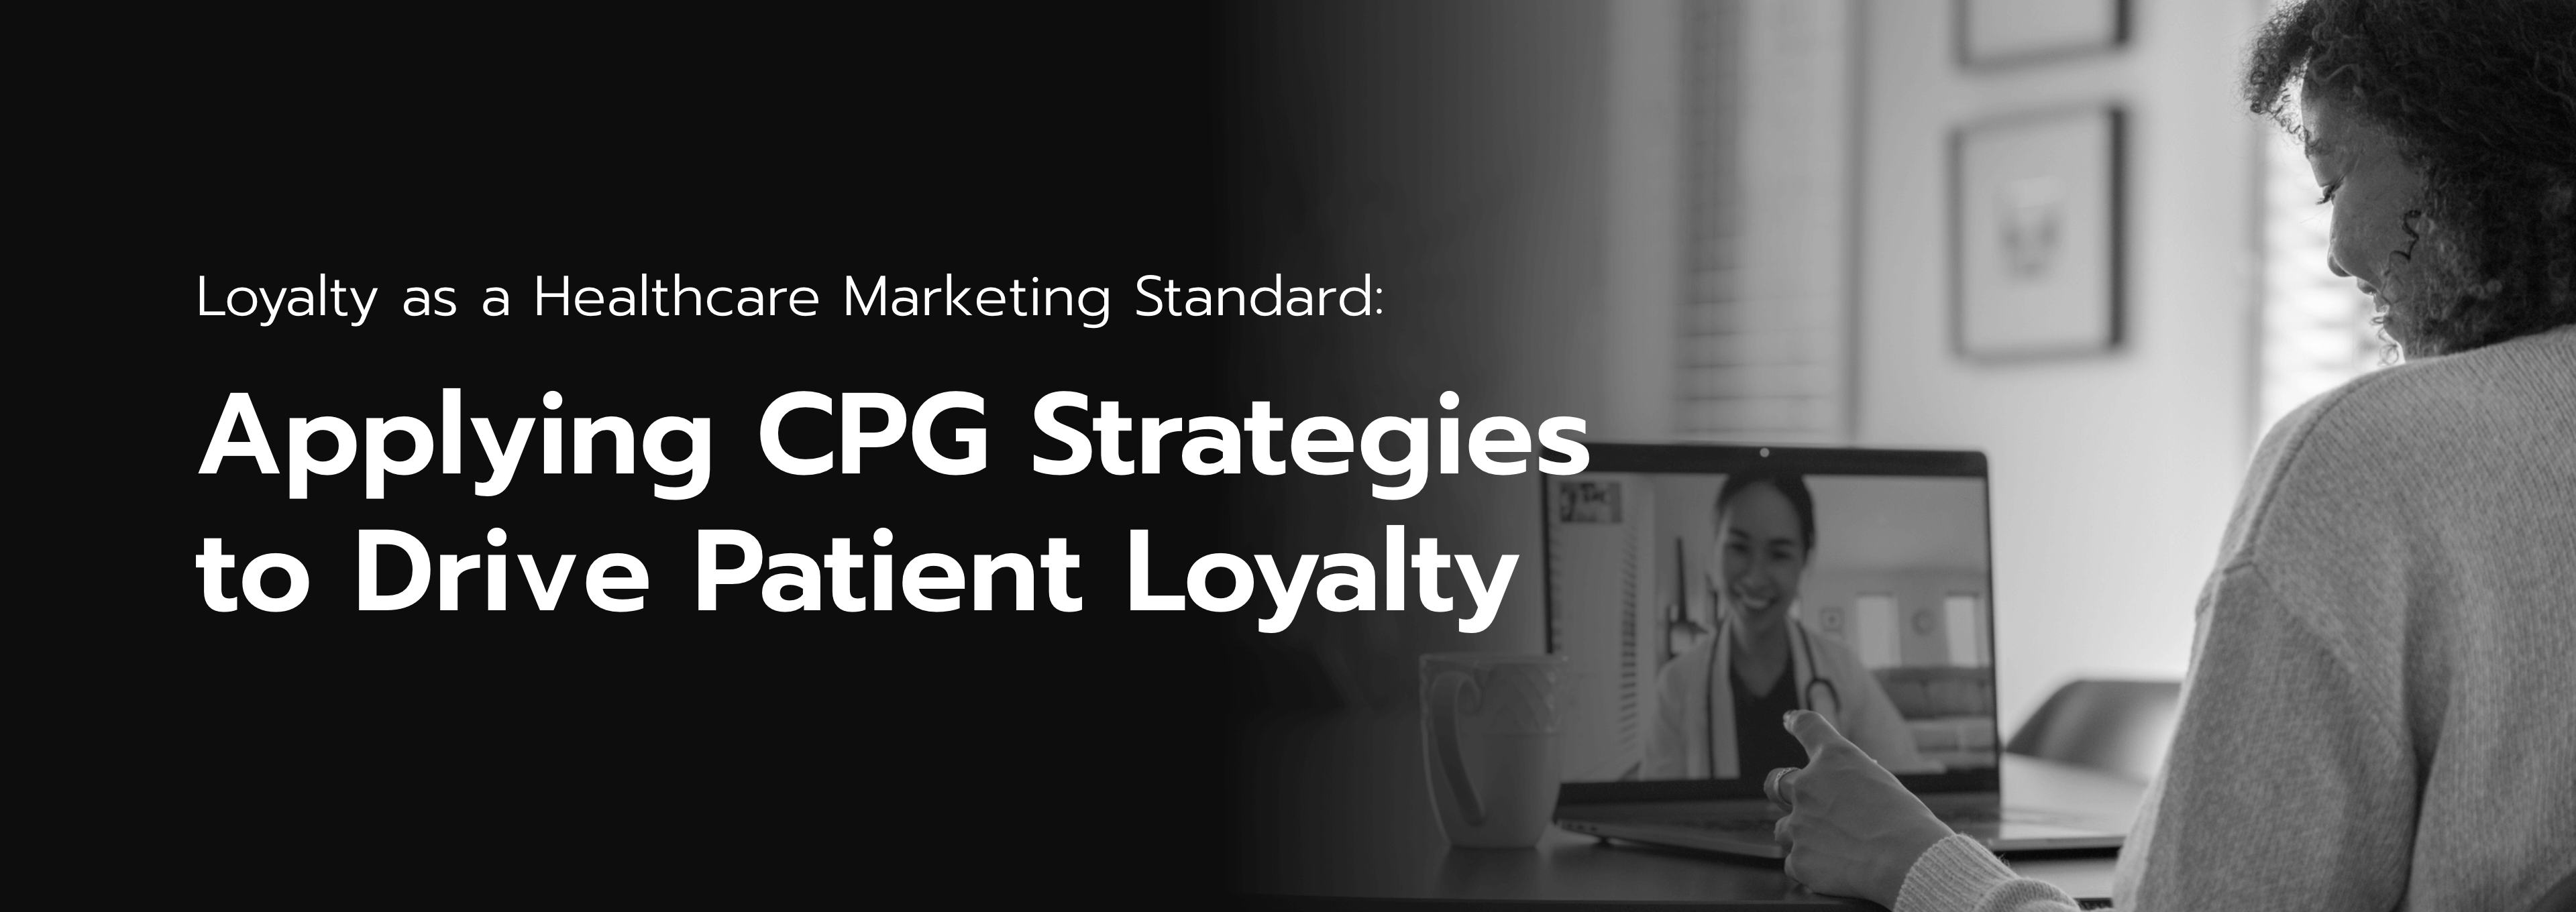 Loyalty as a Healthcare Marketing Standard: Applying CPG Strategies to Drive Patient Loyalty